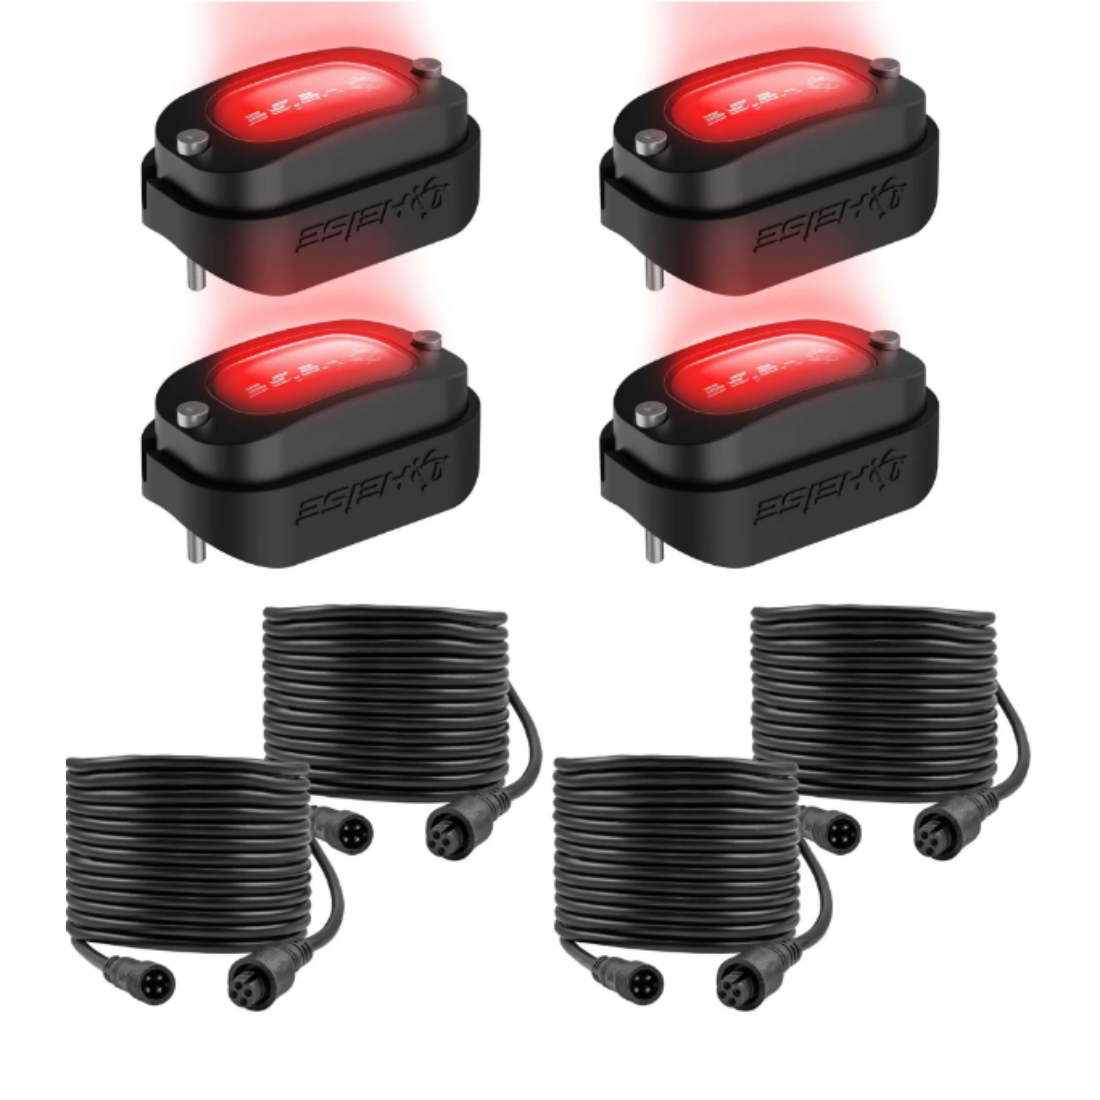 Heise HE-CHASE-K4 Wide Angle Chasing LED Rock Light Kit w/ Controller - 4 Pack